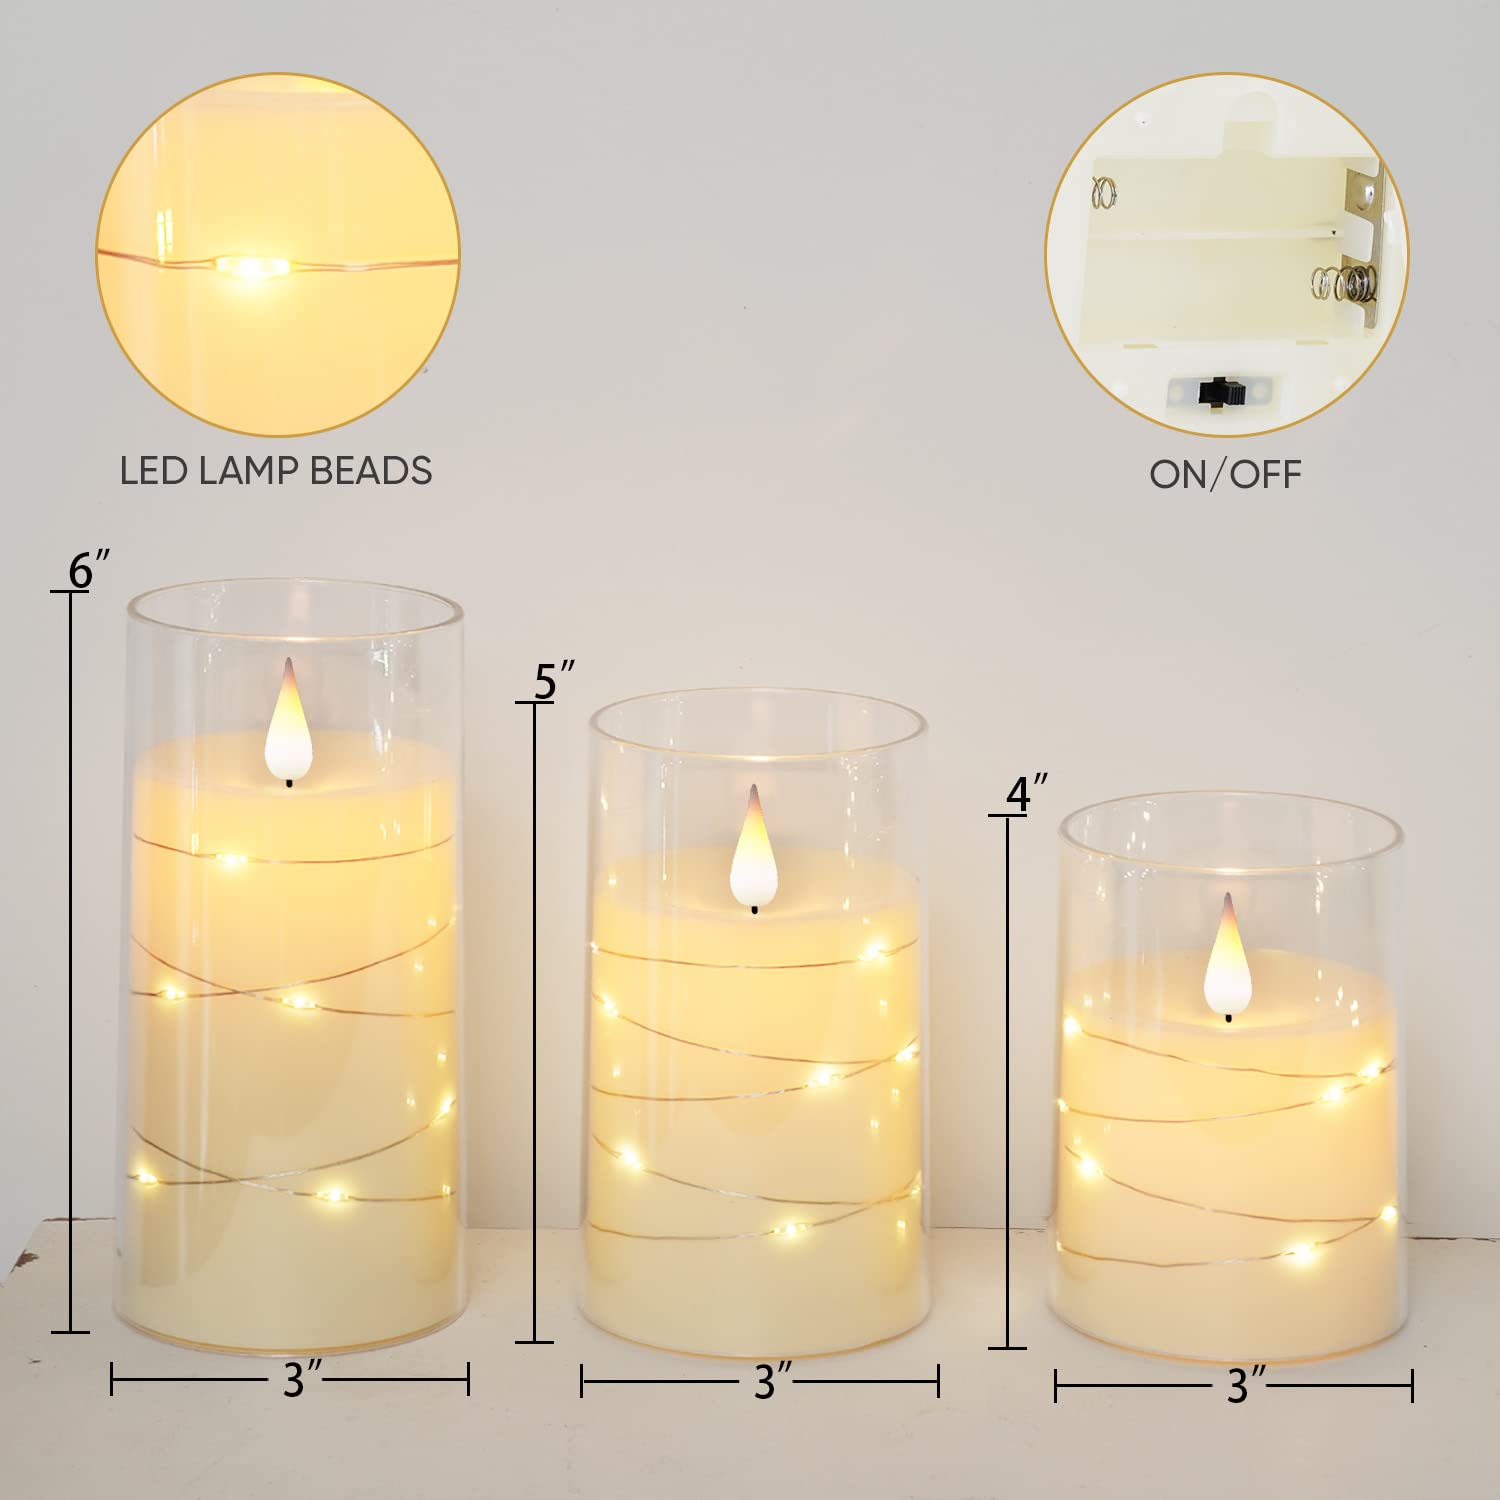 Homemory Flickering Flameless Candles with String Lights, Battery Operated Candles, Embedded String Lights LED Candles, Unbreakable Plexiglass Candles with Remote, Set of 3, Ivory White